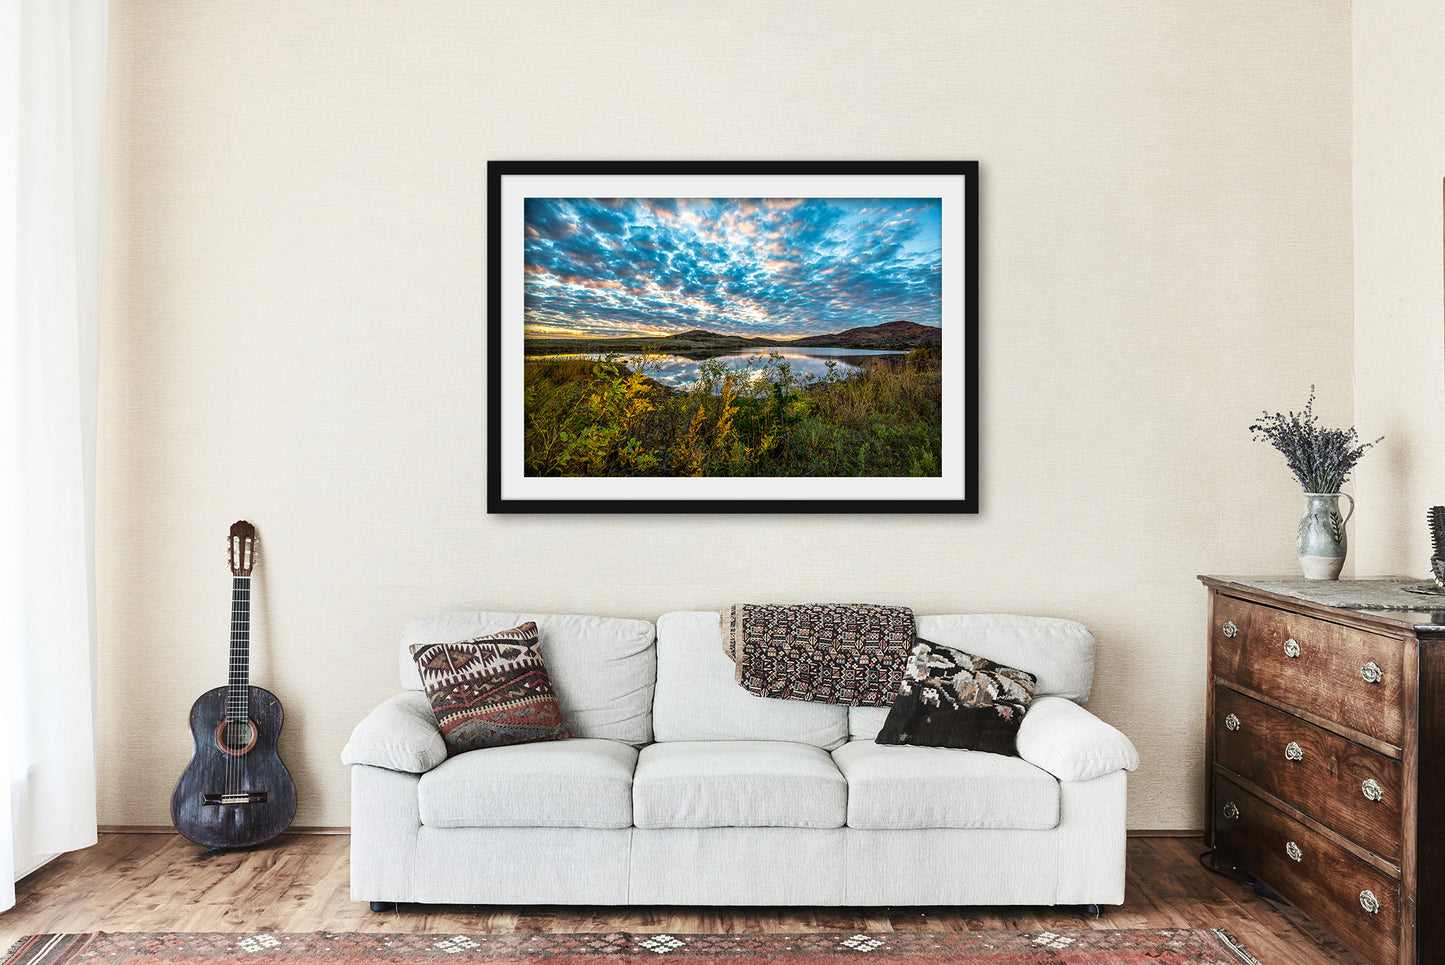 Framed Wichita Mountains Print (Ready to Hang) Picture of Scenic Sky Over Lake at Sunset on Autumn Evening in Oklahoma Great Plains Wall Art Nature Decor